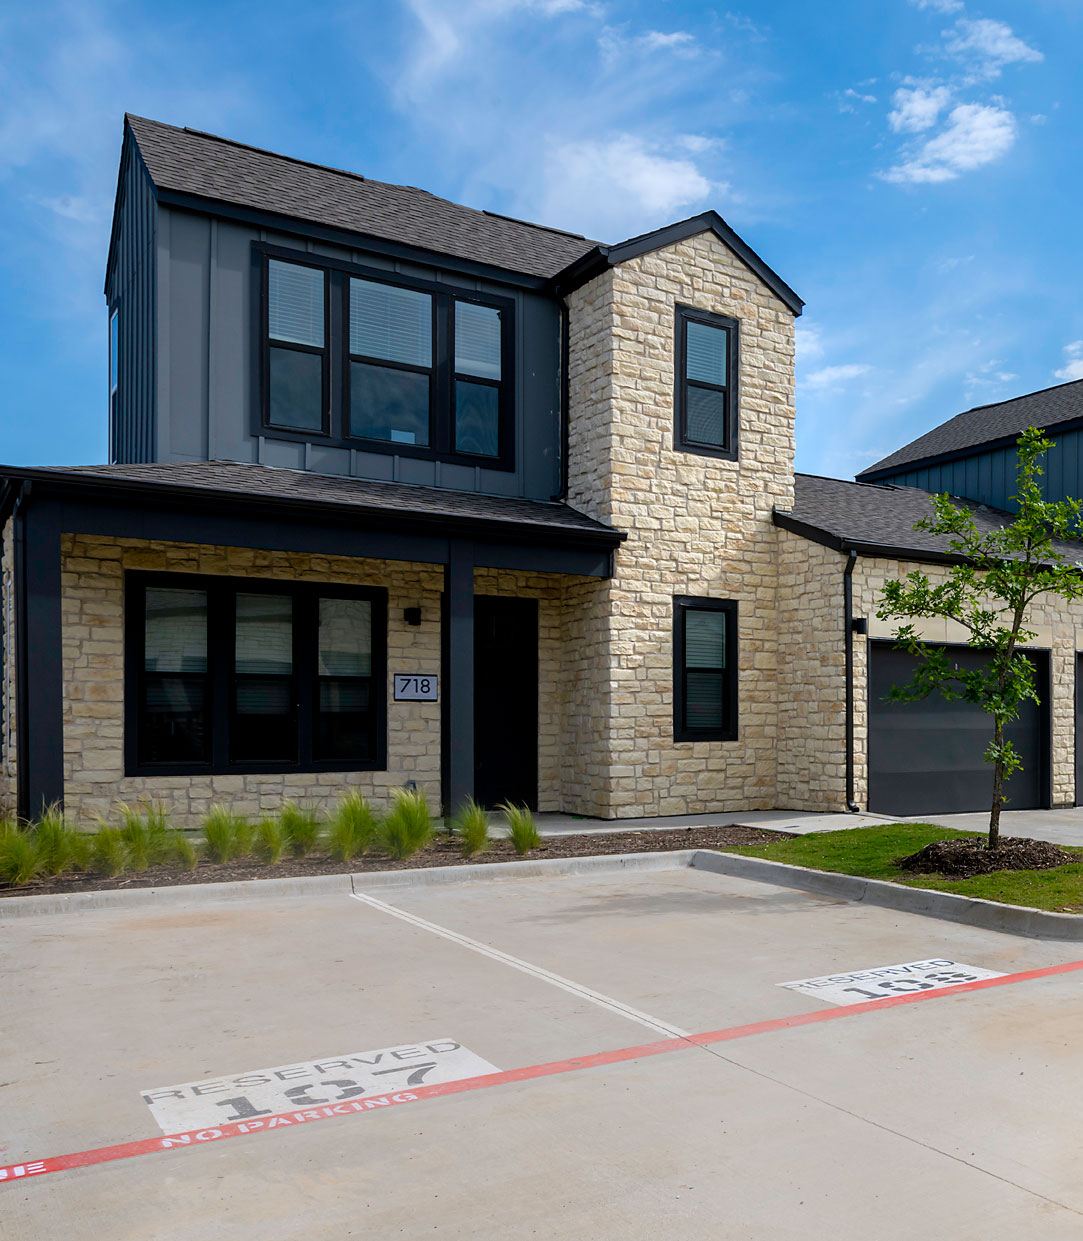 Modern two-story house with stone facade and designated parking spaces in new home communities in Mansfield, TX.